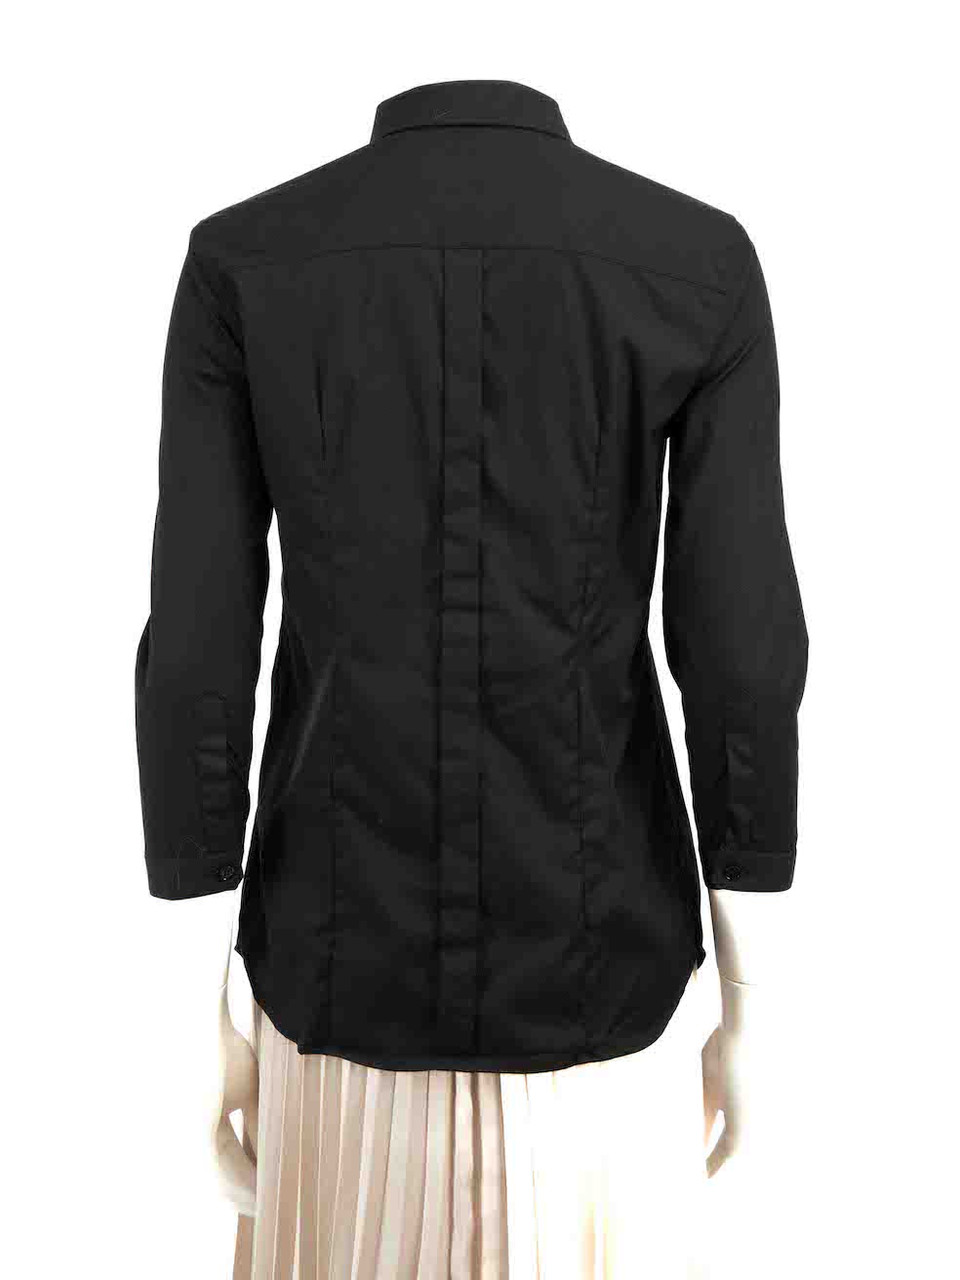 Burberry Black Button Down Collared Shirt